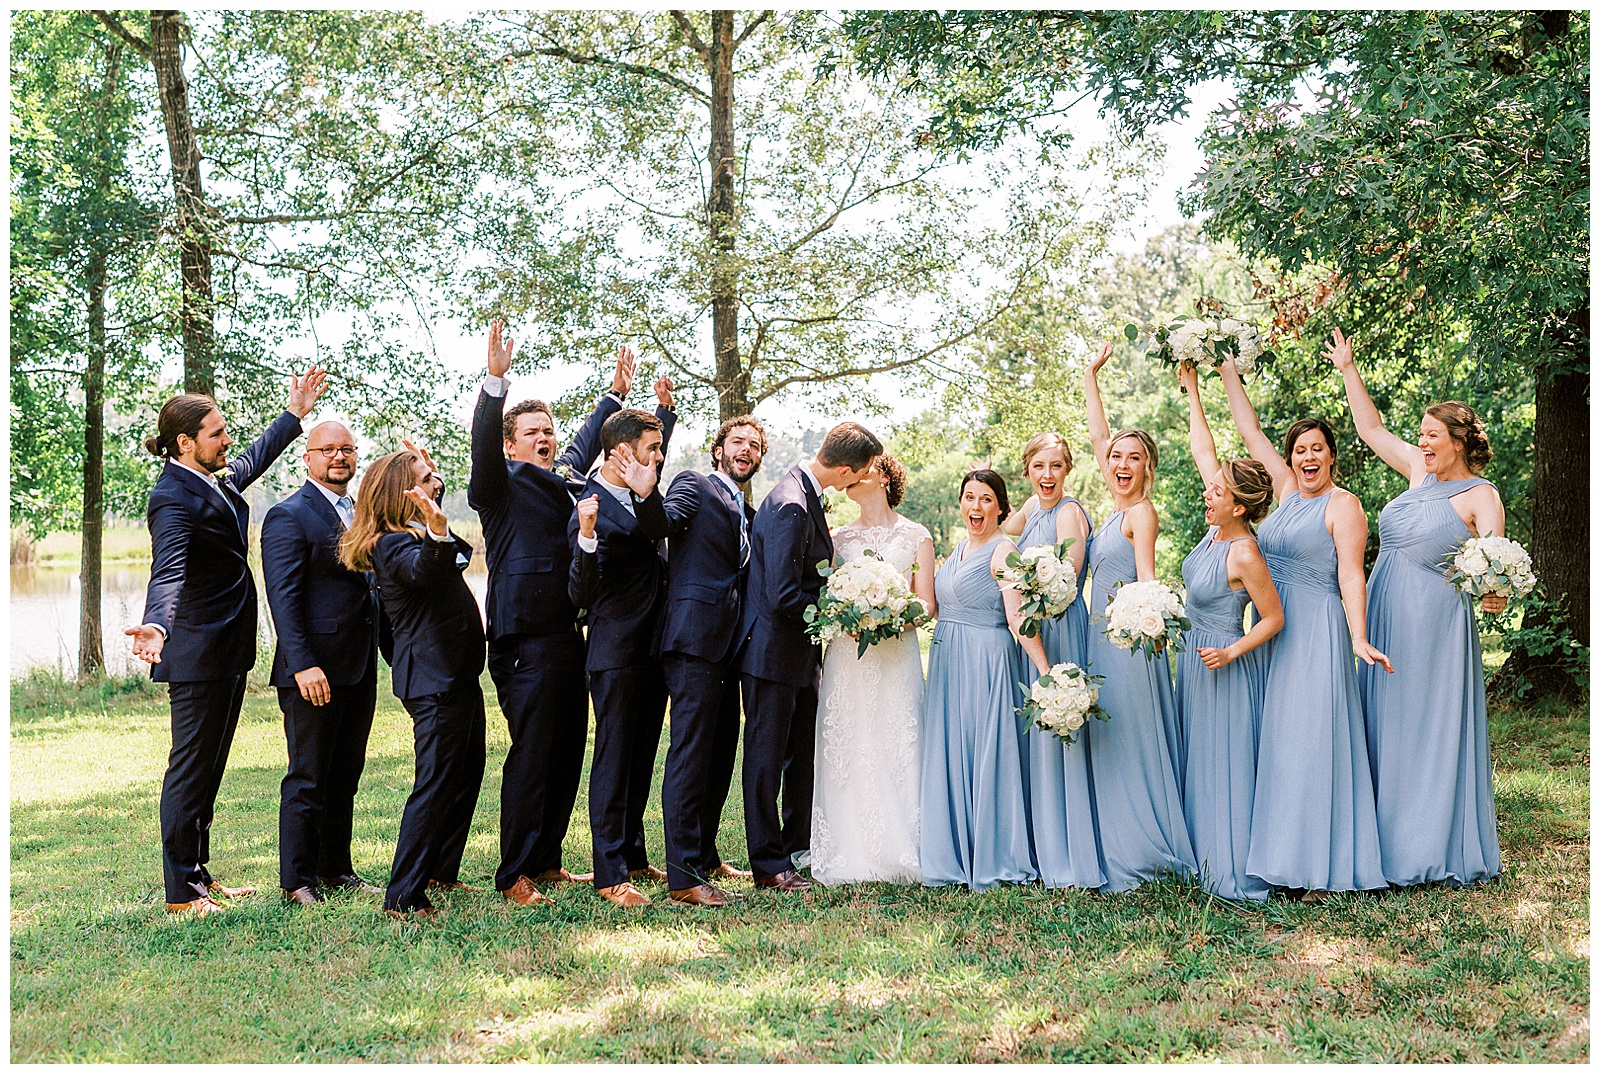 dusty blue bridesmaid bride tribe with white flower bouquet and navy blue suit groomsmen summer outdoor bridal party group portrait